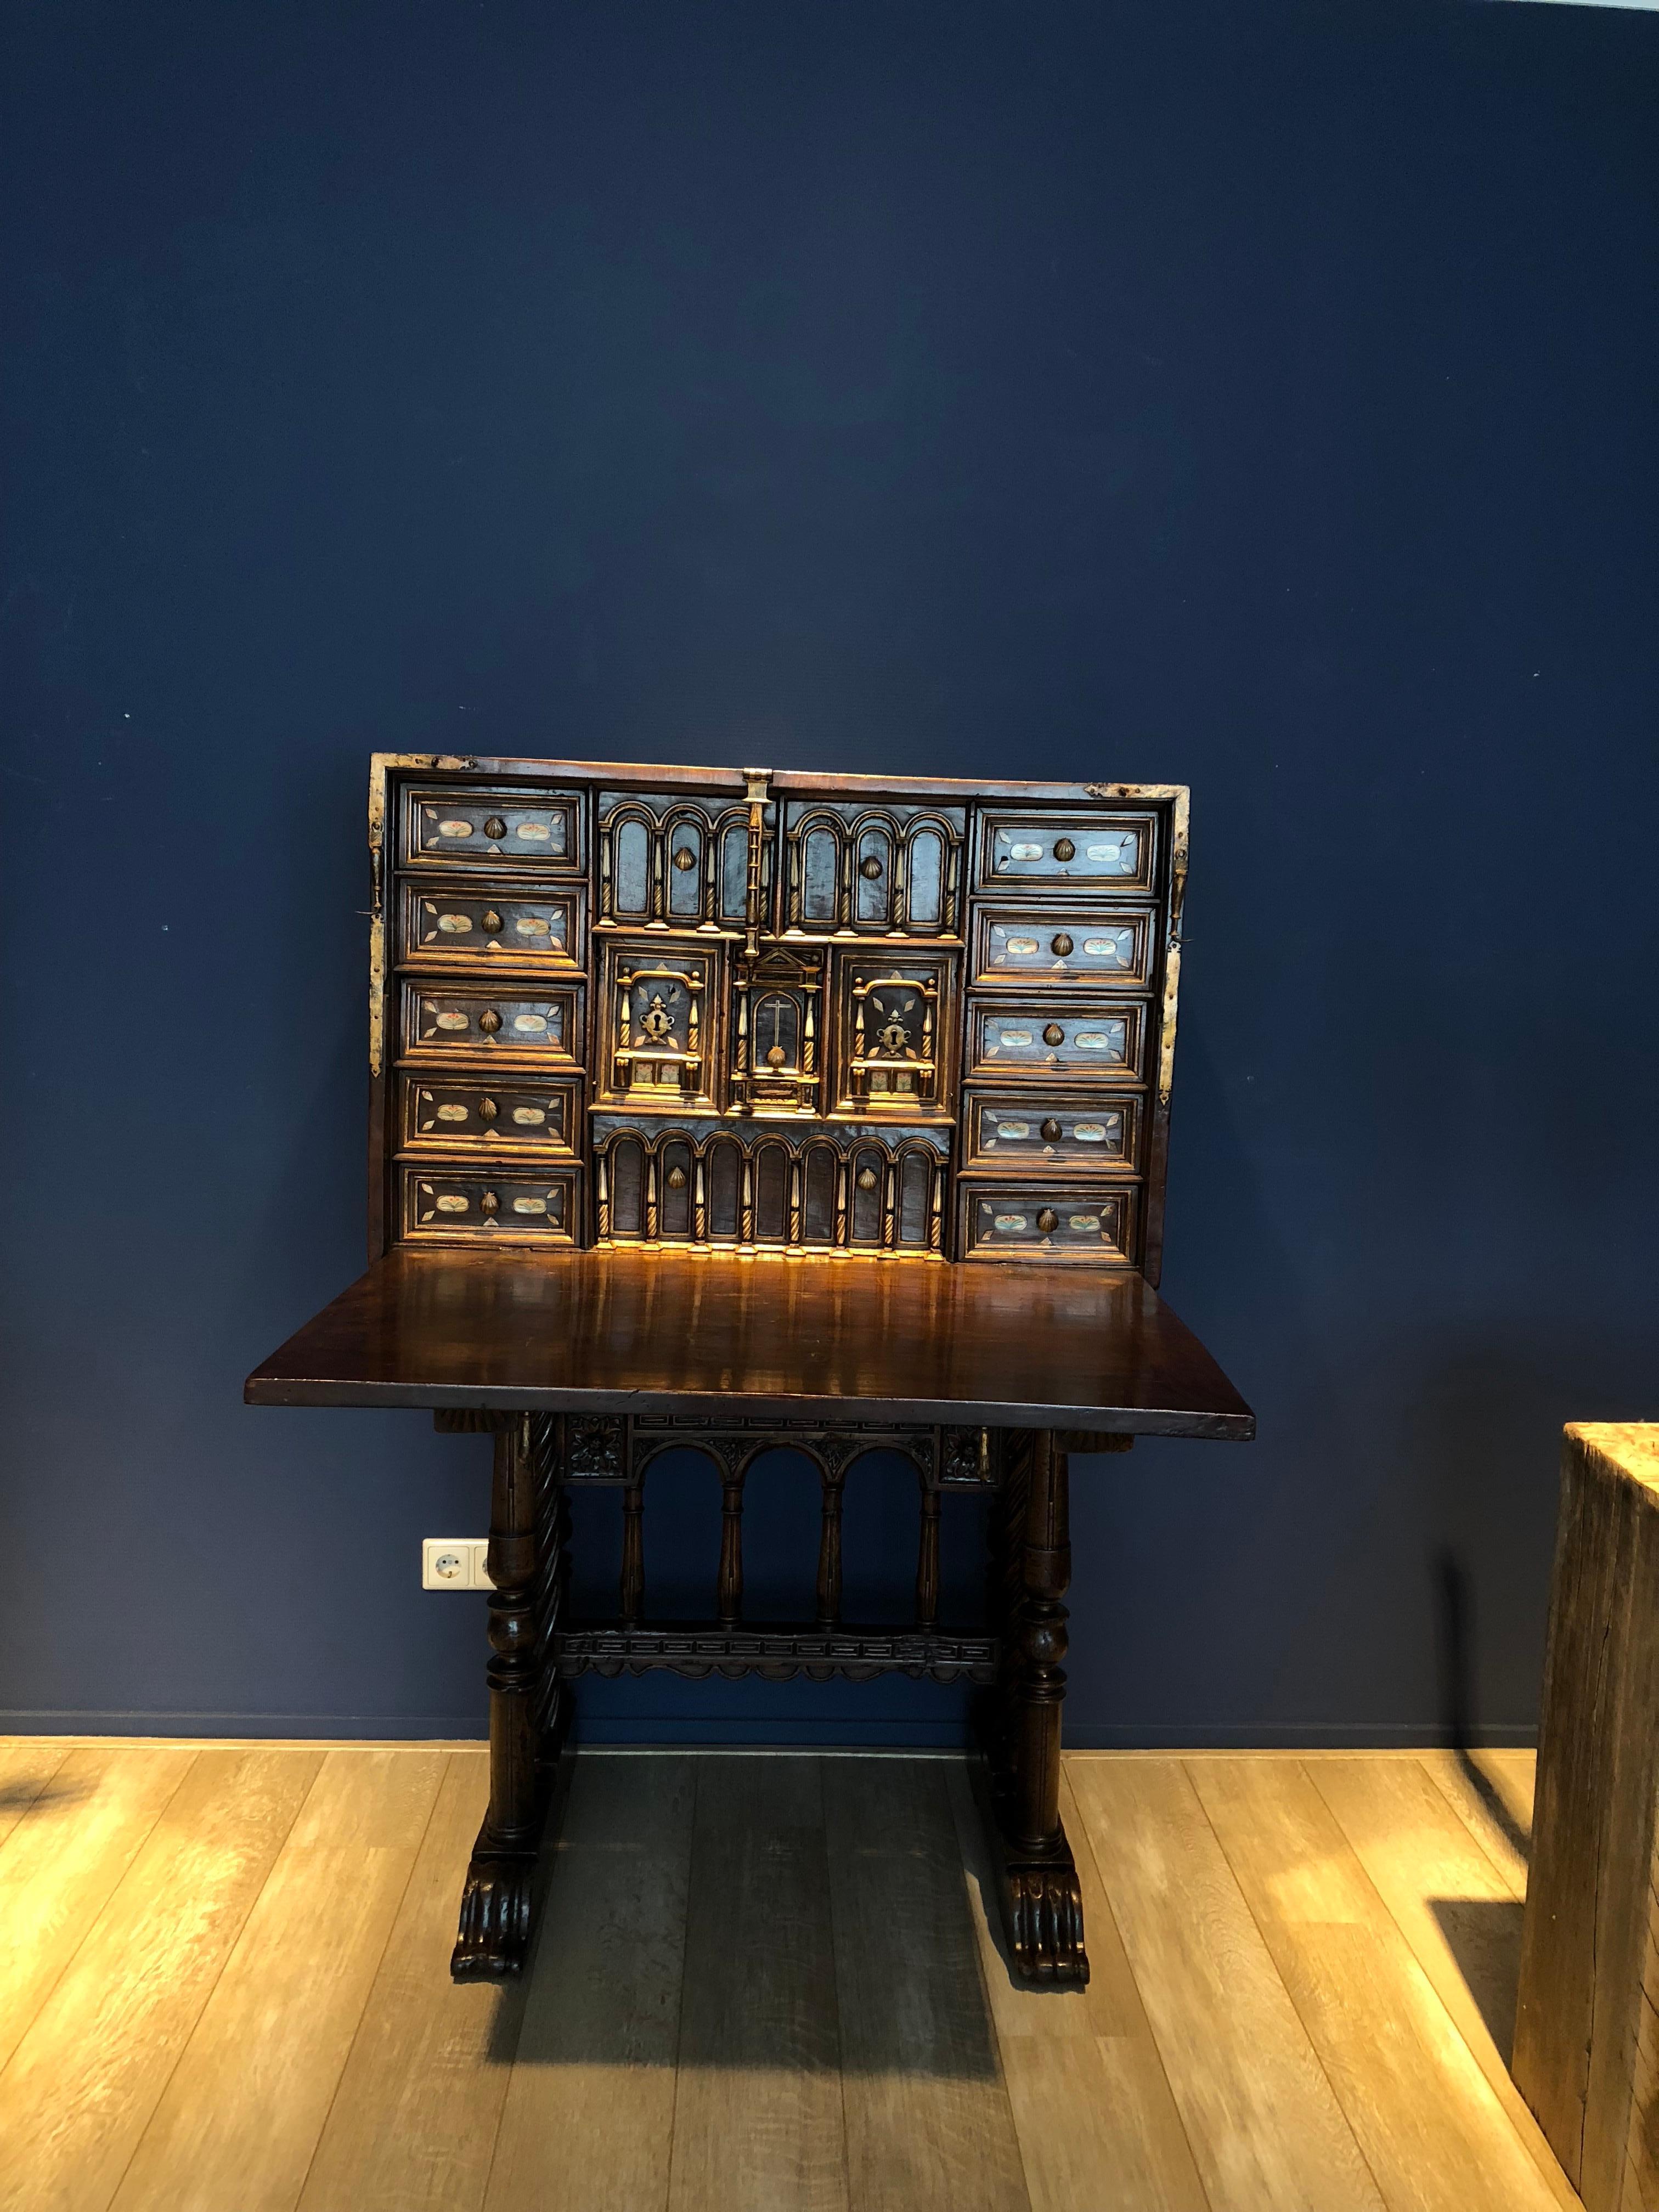 This late 16th-17th century Spanish Walnut Vargueno or Bargueno desk is a form of portable
desk, resembling the top half of a fall front desk. It is basically a chest or box with the top
panel, serving as a “lid.” It folds down to become a